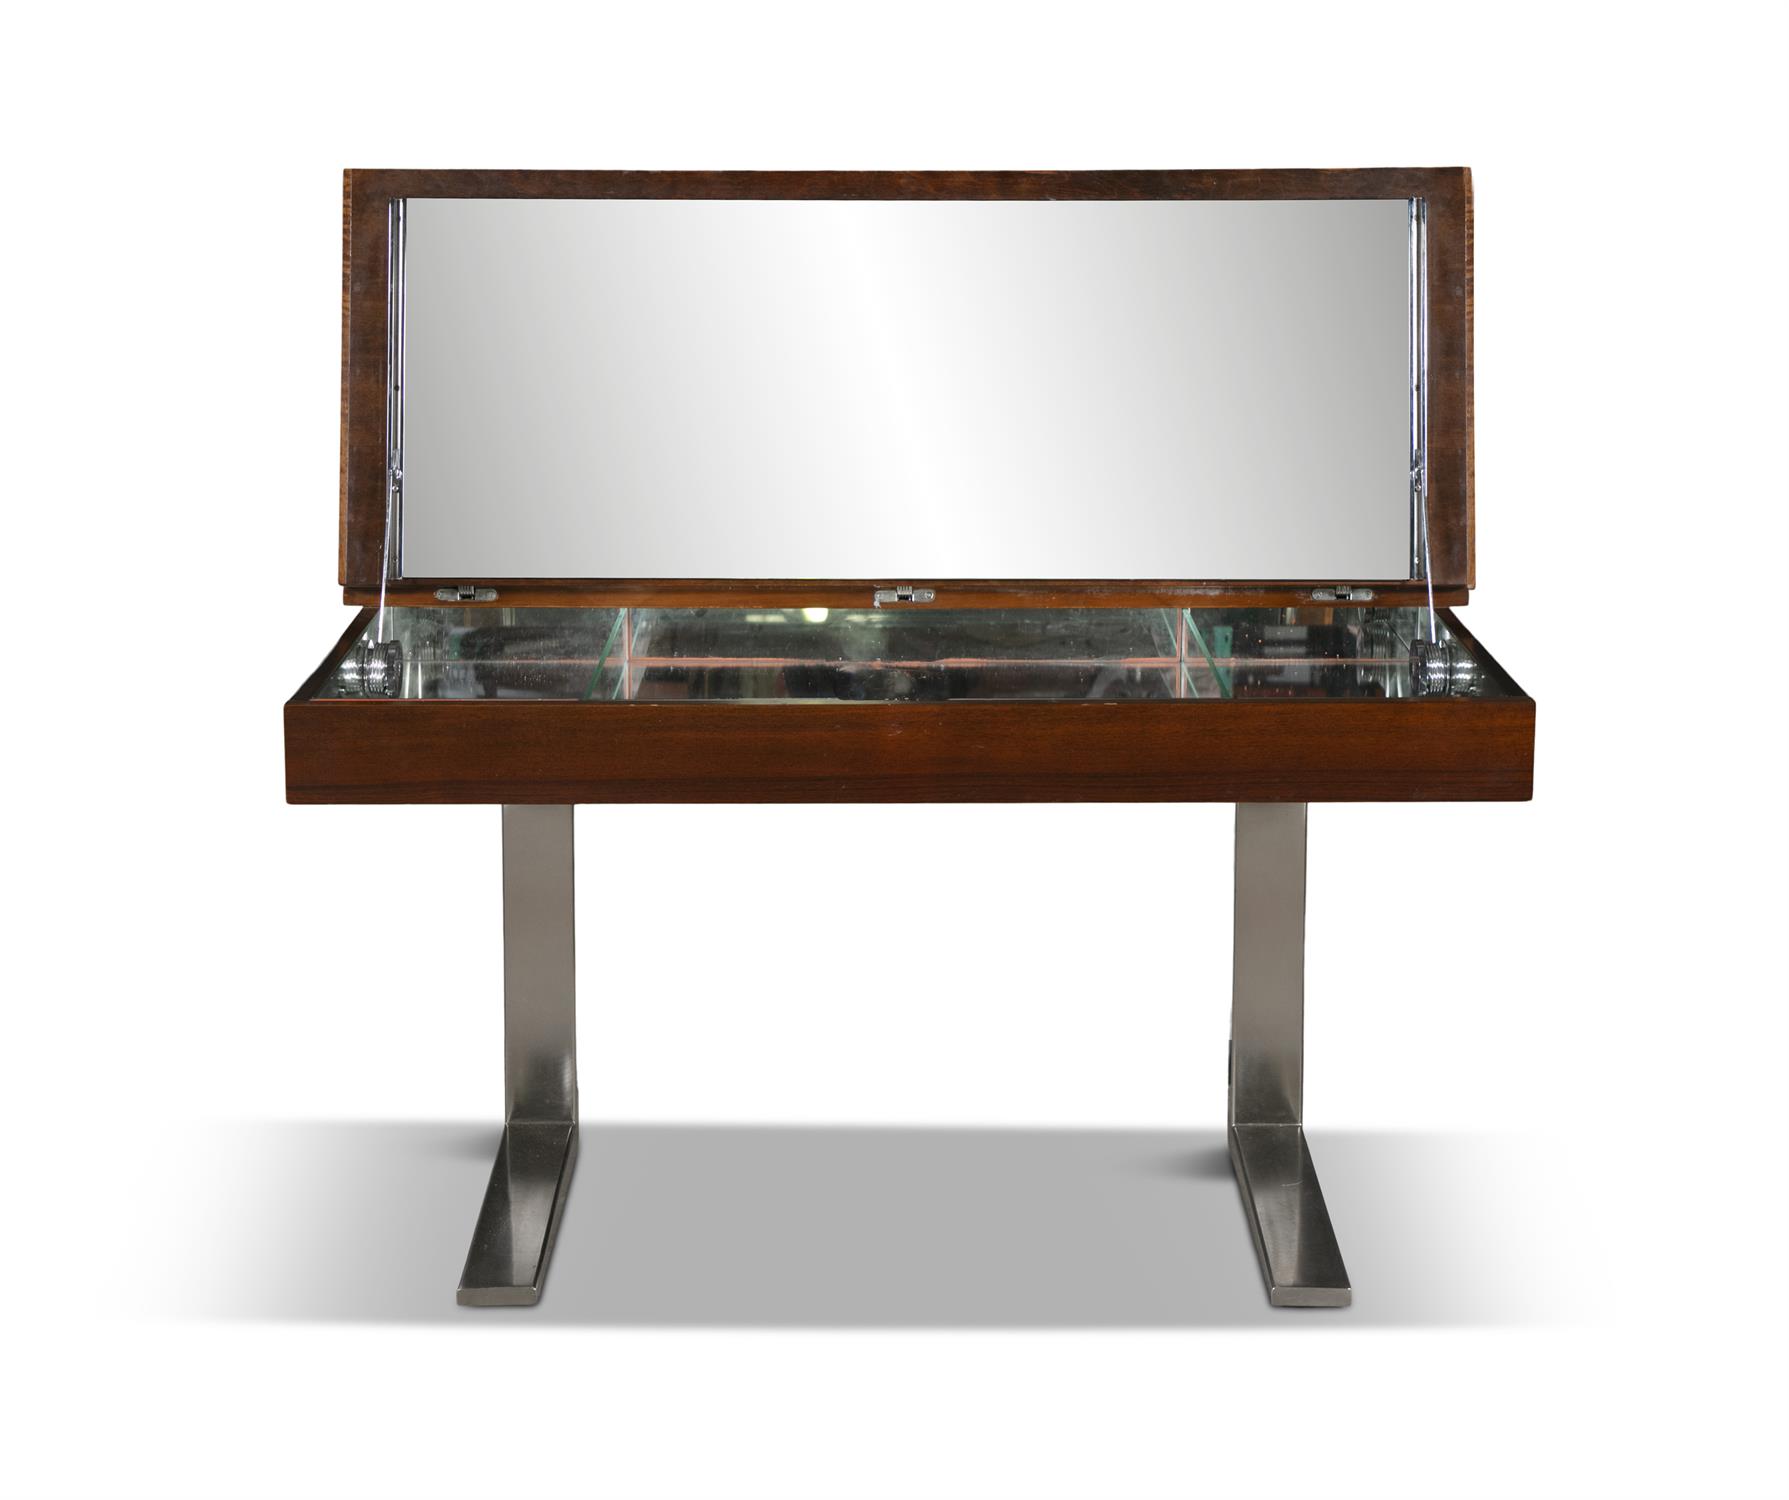 VANITY UNIT Walnut vanity unit, lift top, mirror interior with two chairs. Italy. - Image 7 of 9